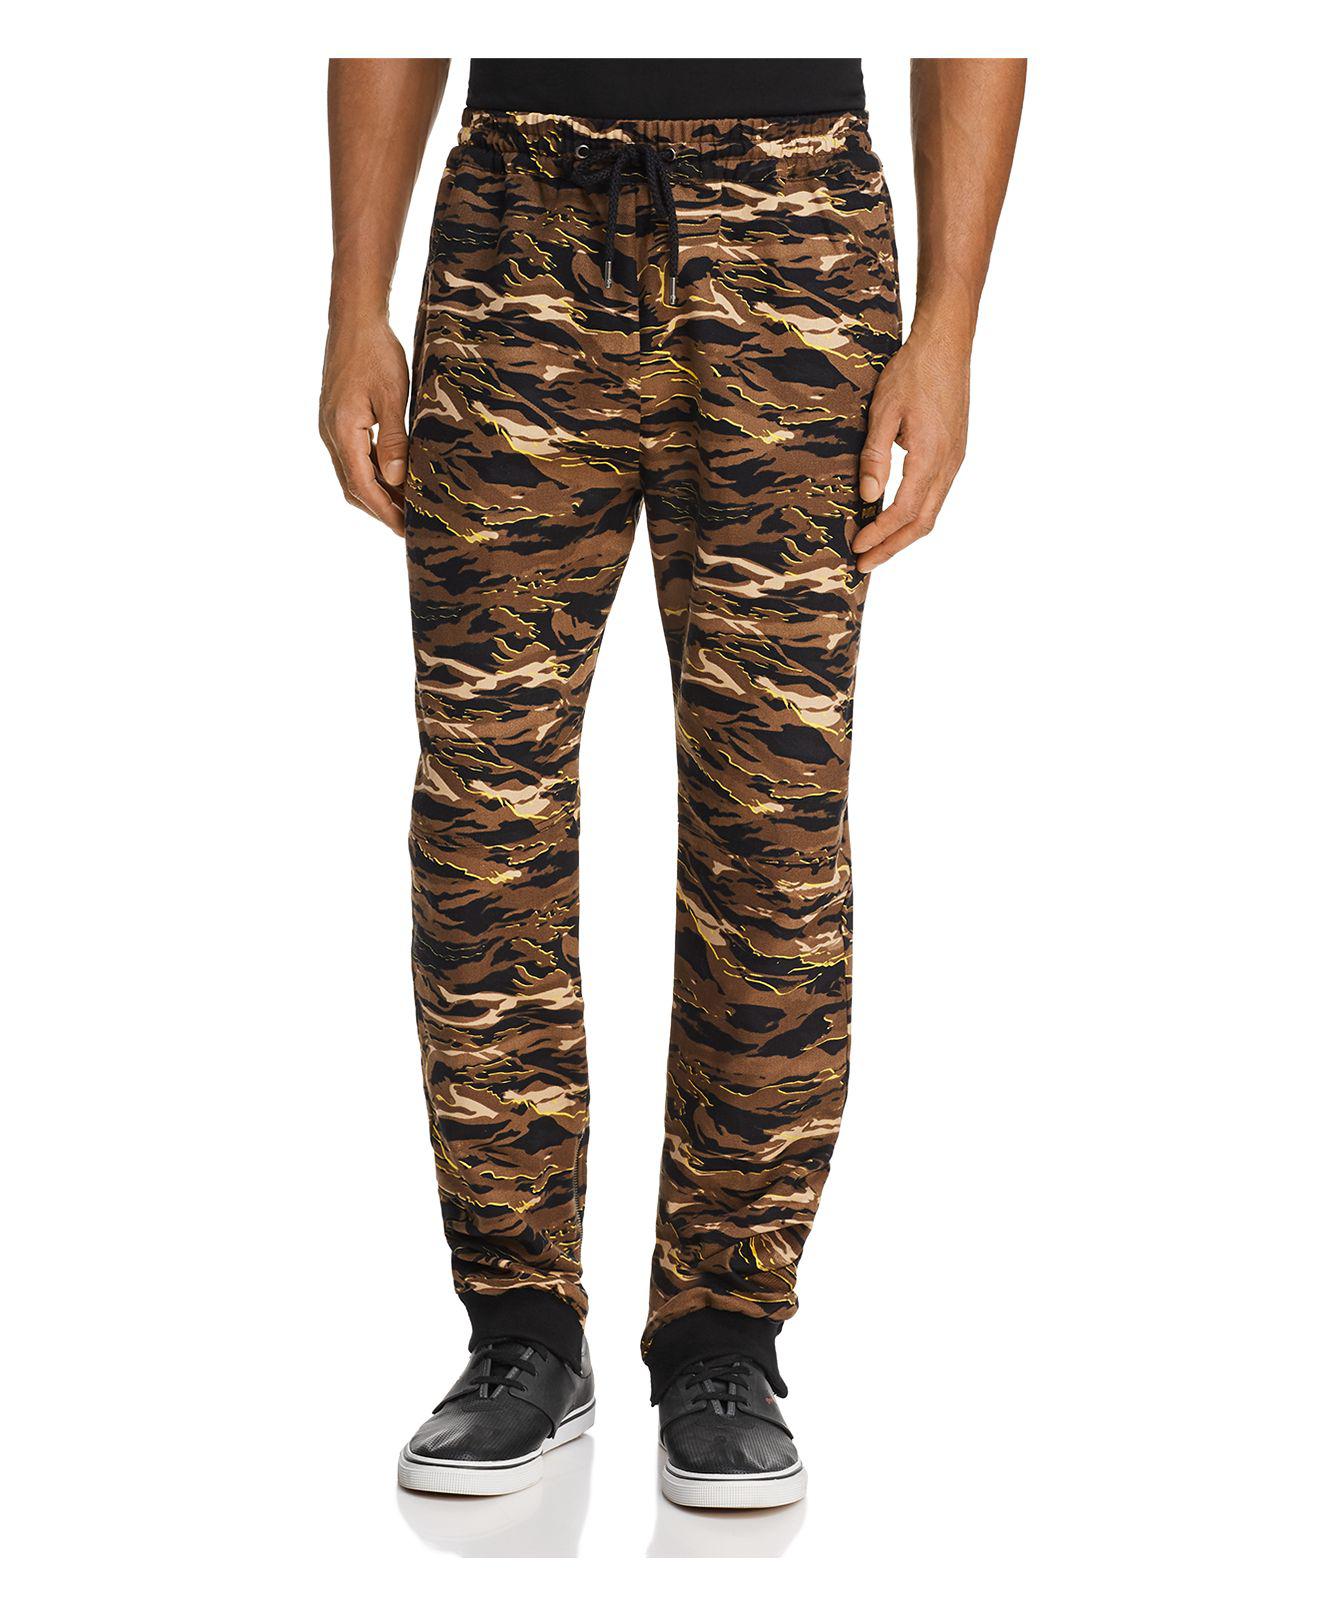 PUMA X Xo Camouflage Jogger Pants for 